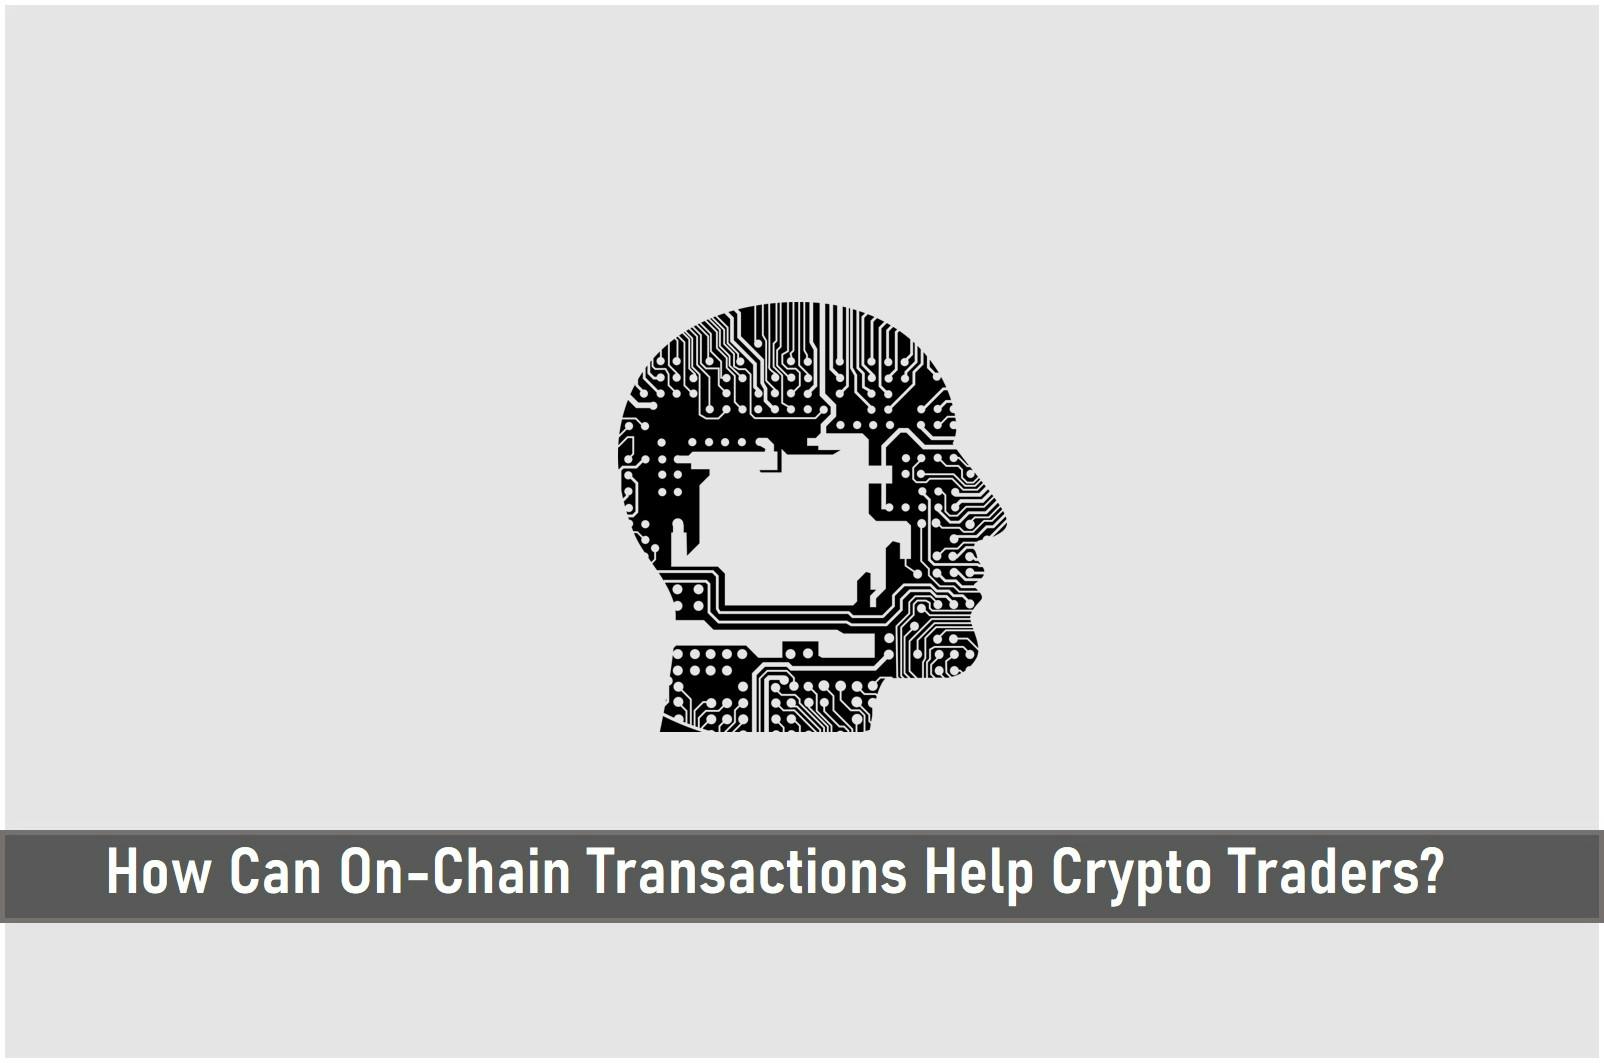 How Can On-Chain Transactions Help Crypto Traders?